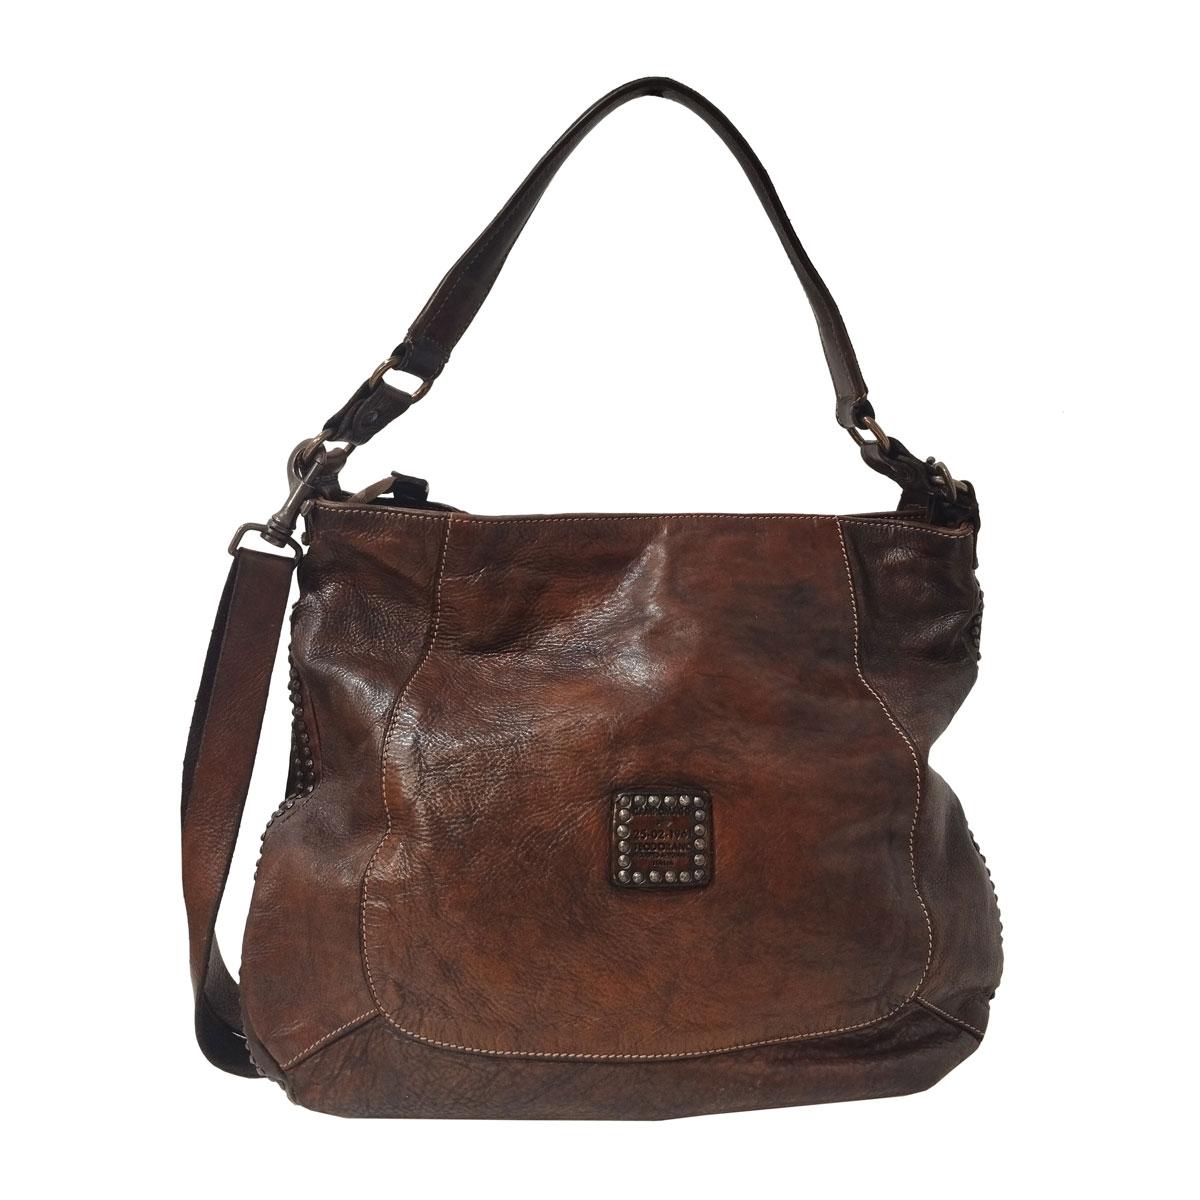 Beautiful and easy to wear italian manufactured bag
Leather bag from Campomaggi Italy
Brown color
Studded
Can be carried on shoulder or crossbody
Zip closure
Internal zip pocket and phone holder
Cm 38 x 35 (14,9 x13,77 inches)
With dustbag
Fast